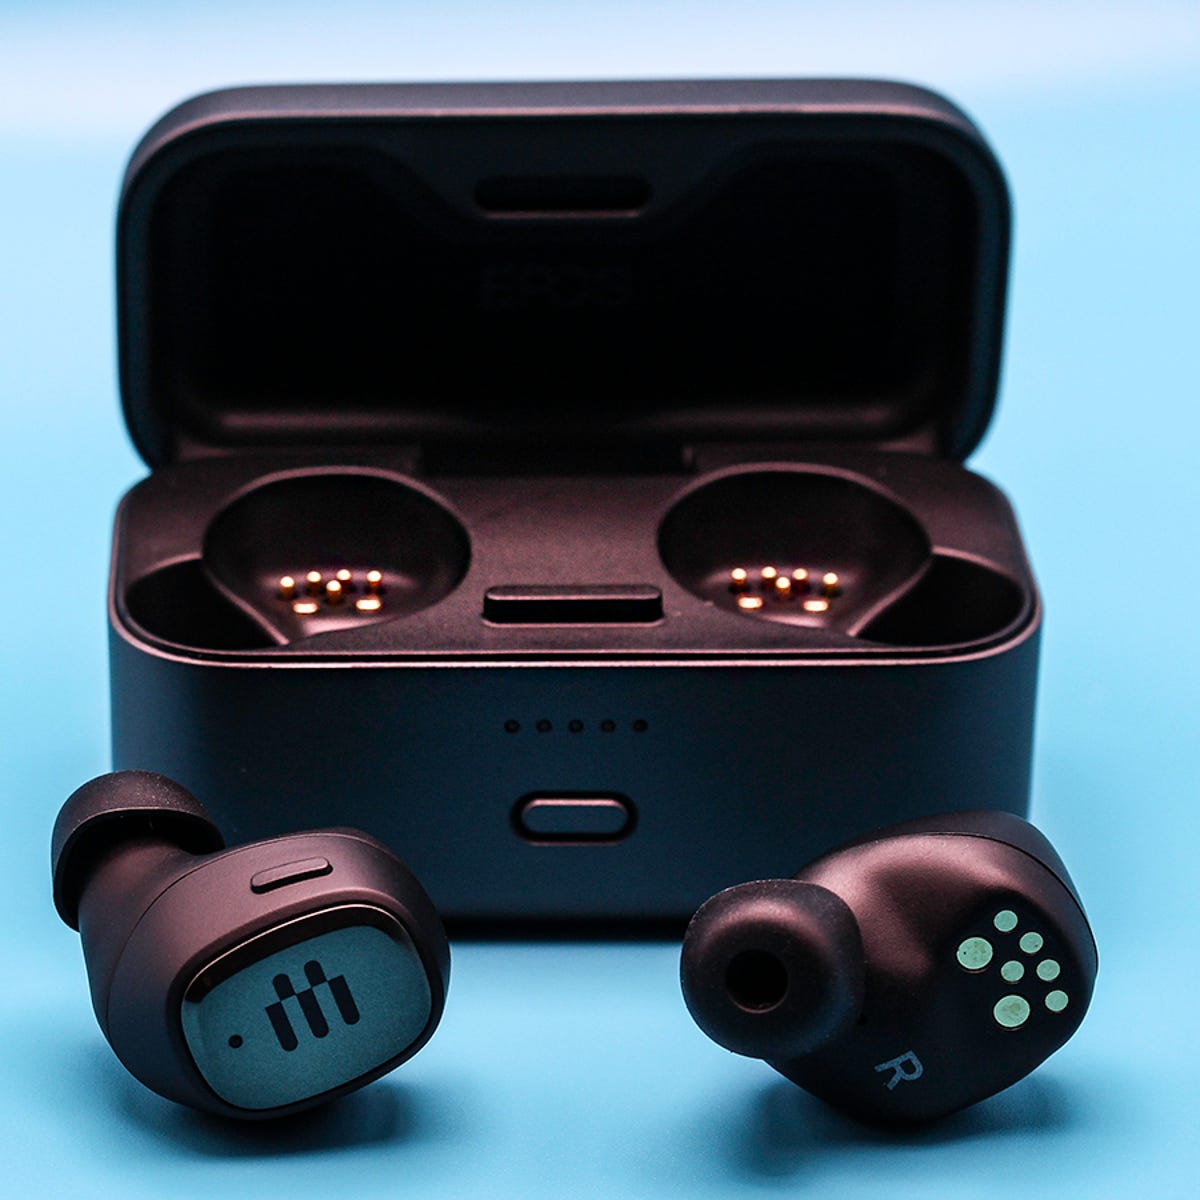 Looking for wireless gaming earbuds? The EPOS GTW 270 are next level | ZDNET